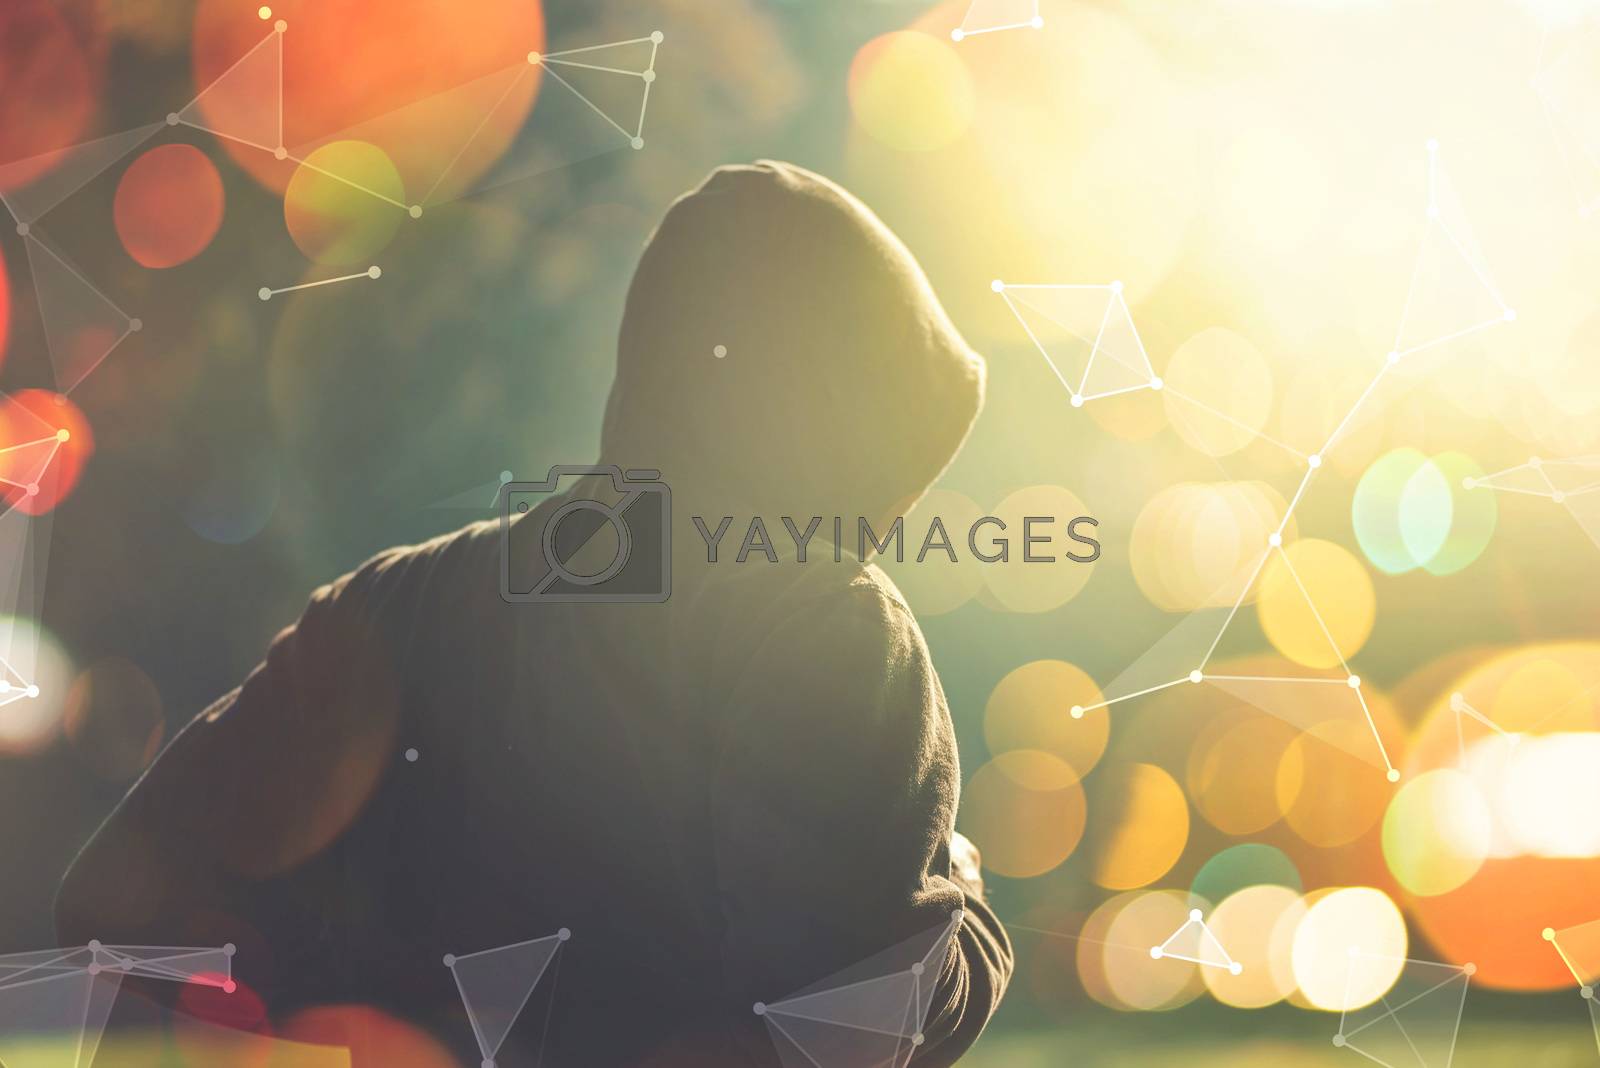 Royalty free image of Male jogger running outdoors by stevanovicigor